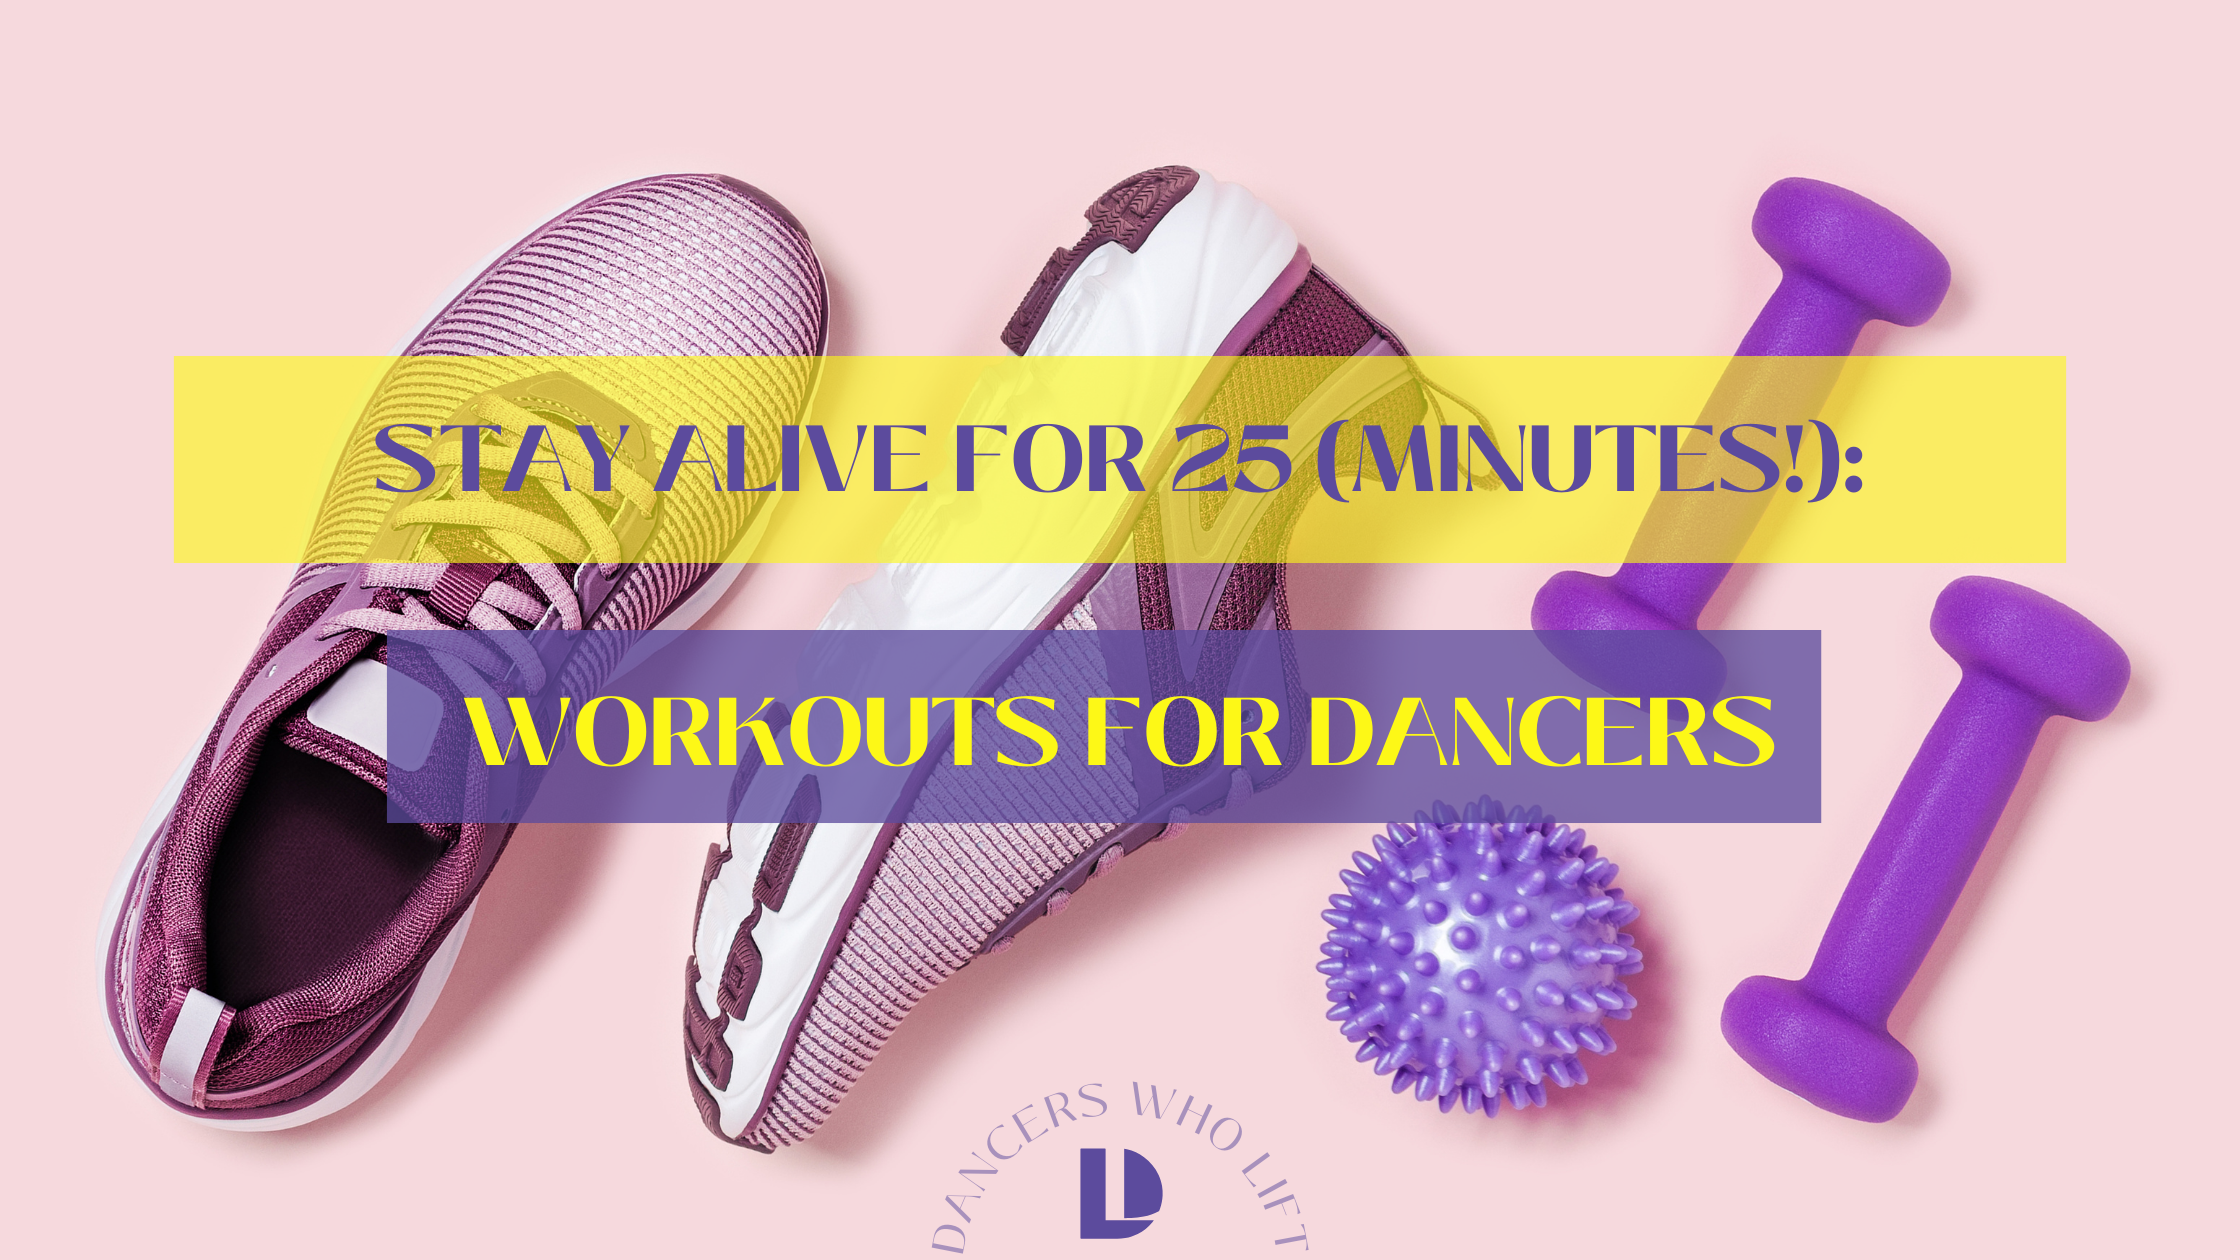 workouts for dancers, weight lifting for dancers